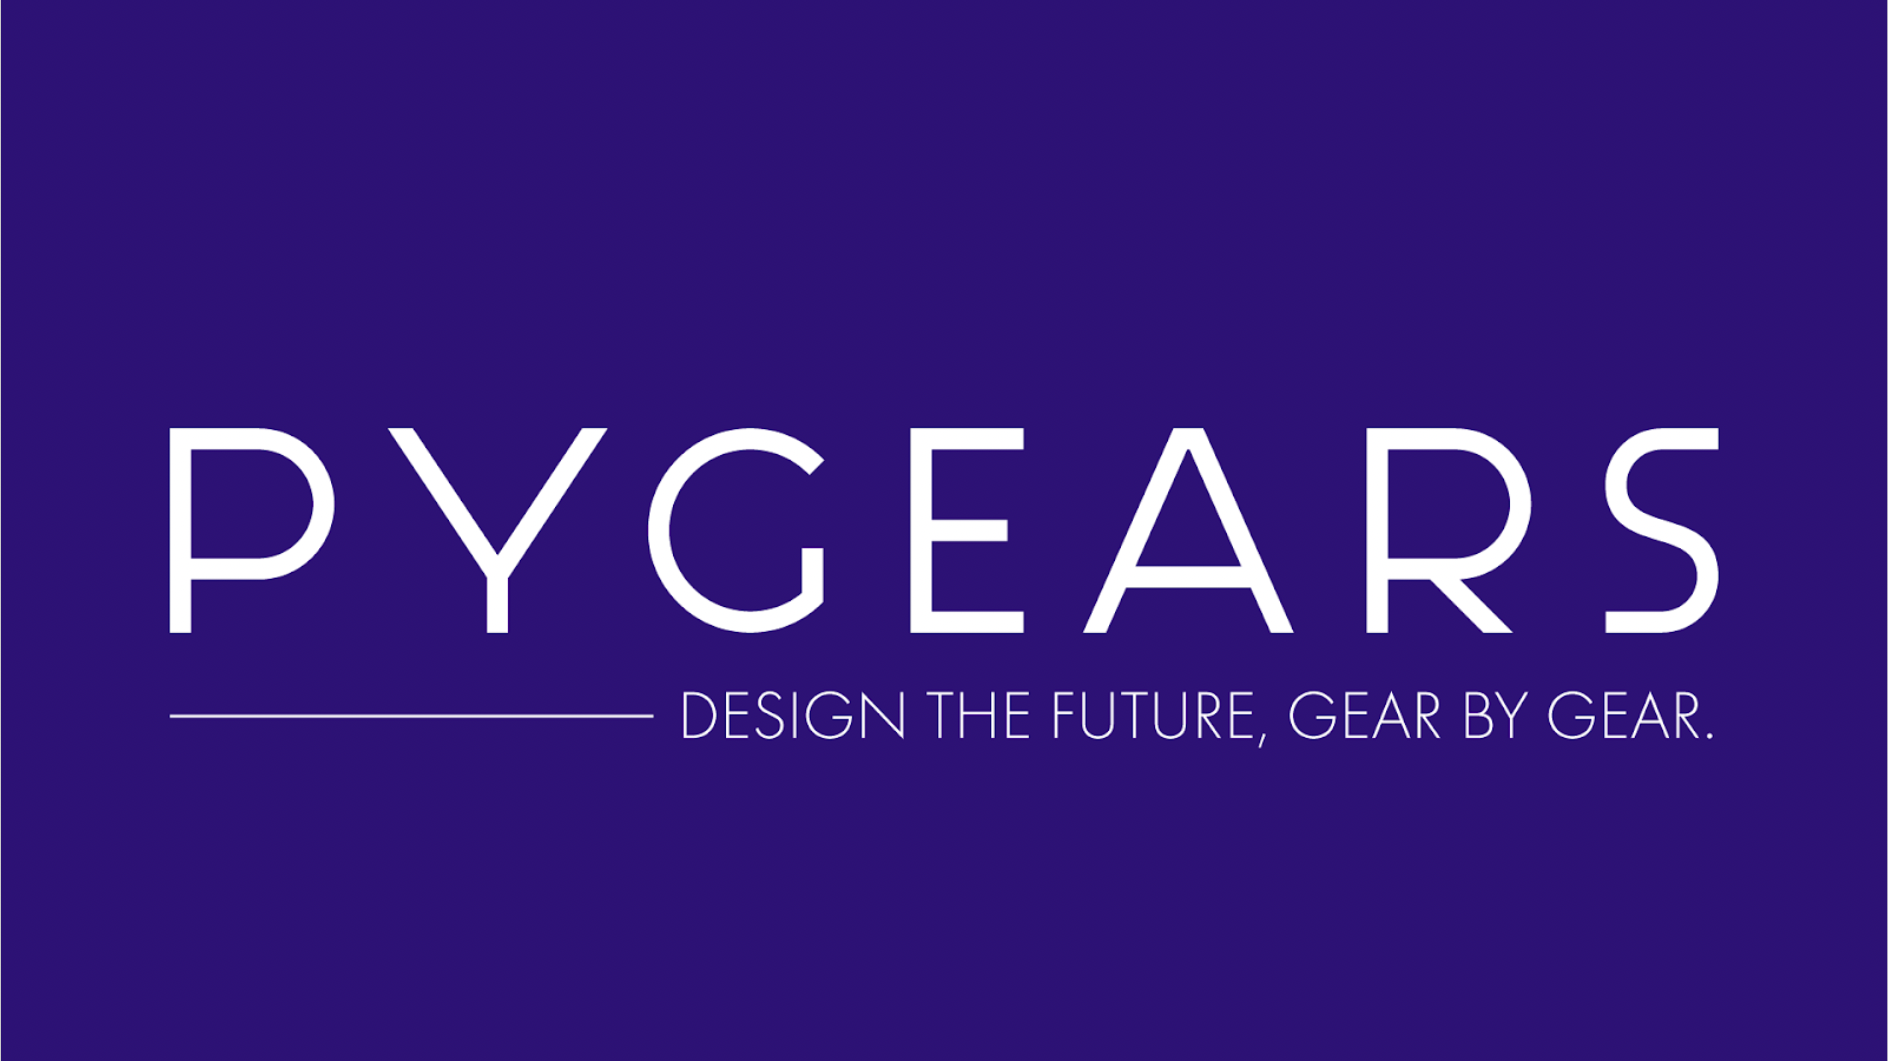 _images/pygears_presentation_picture.png